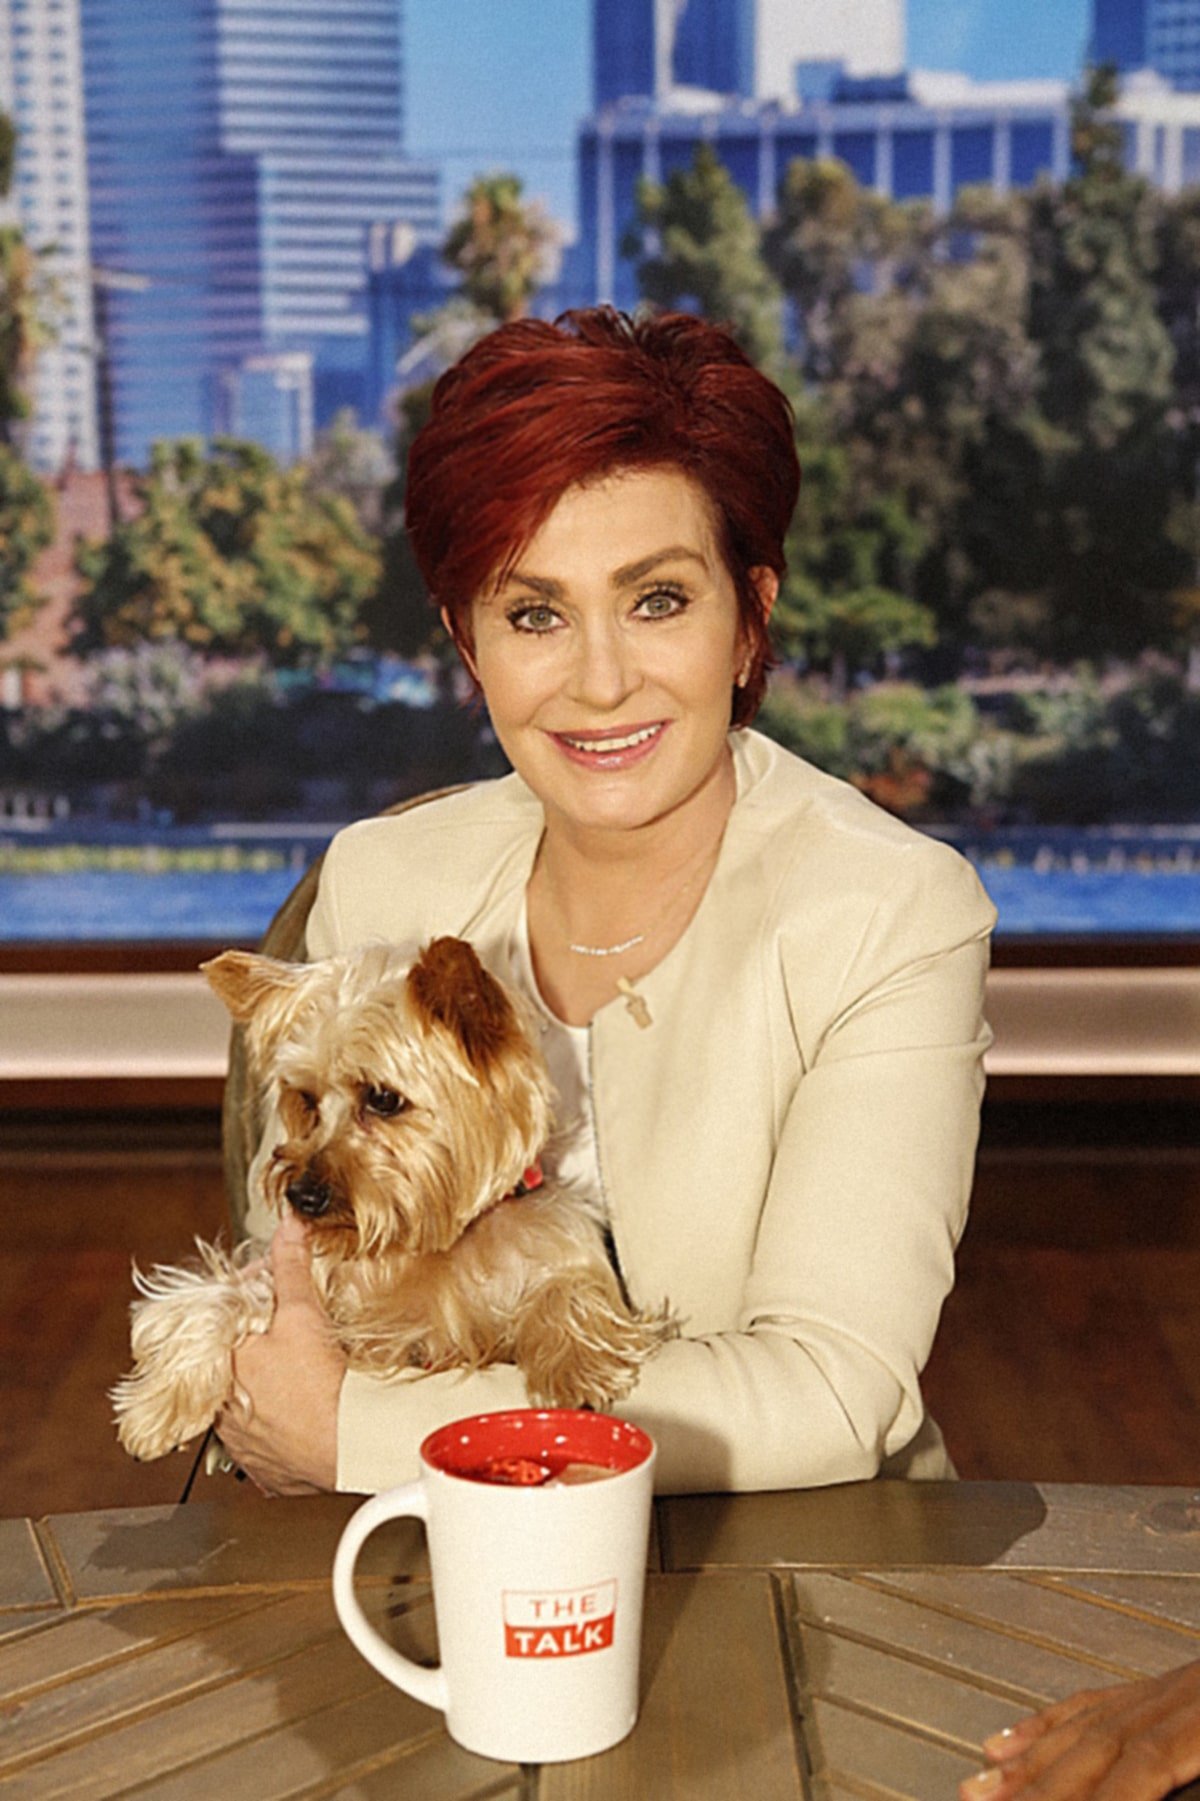 THE TALK, (from left): co-host Sharon Osbourne with her dog, Charlie,